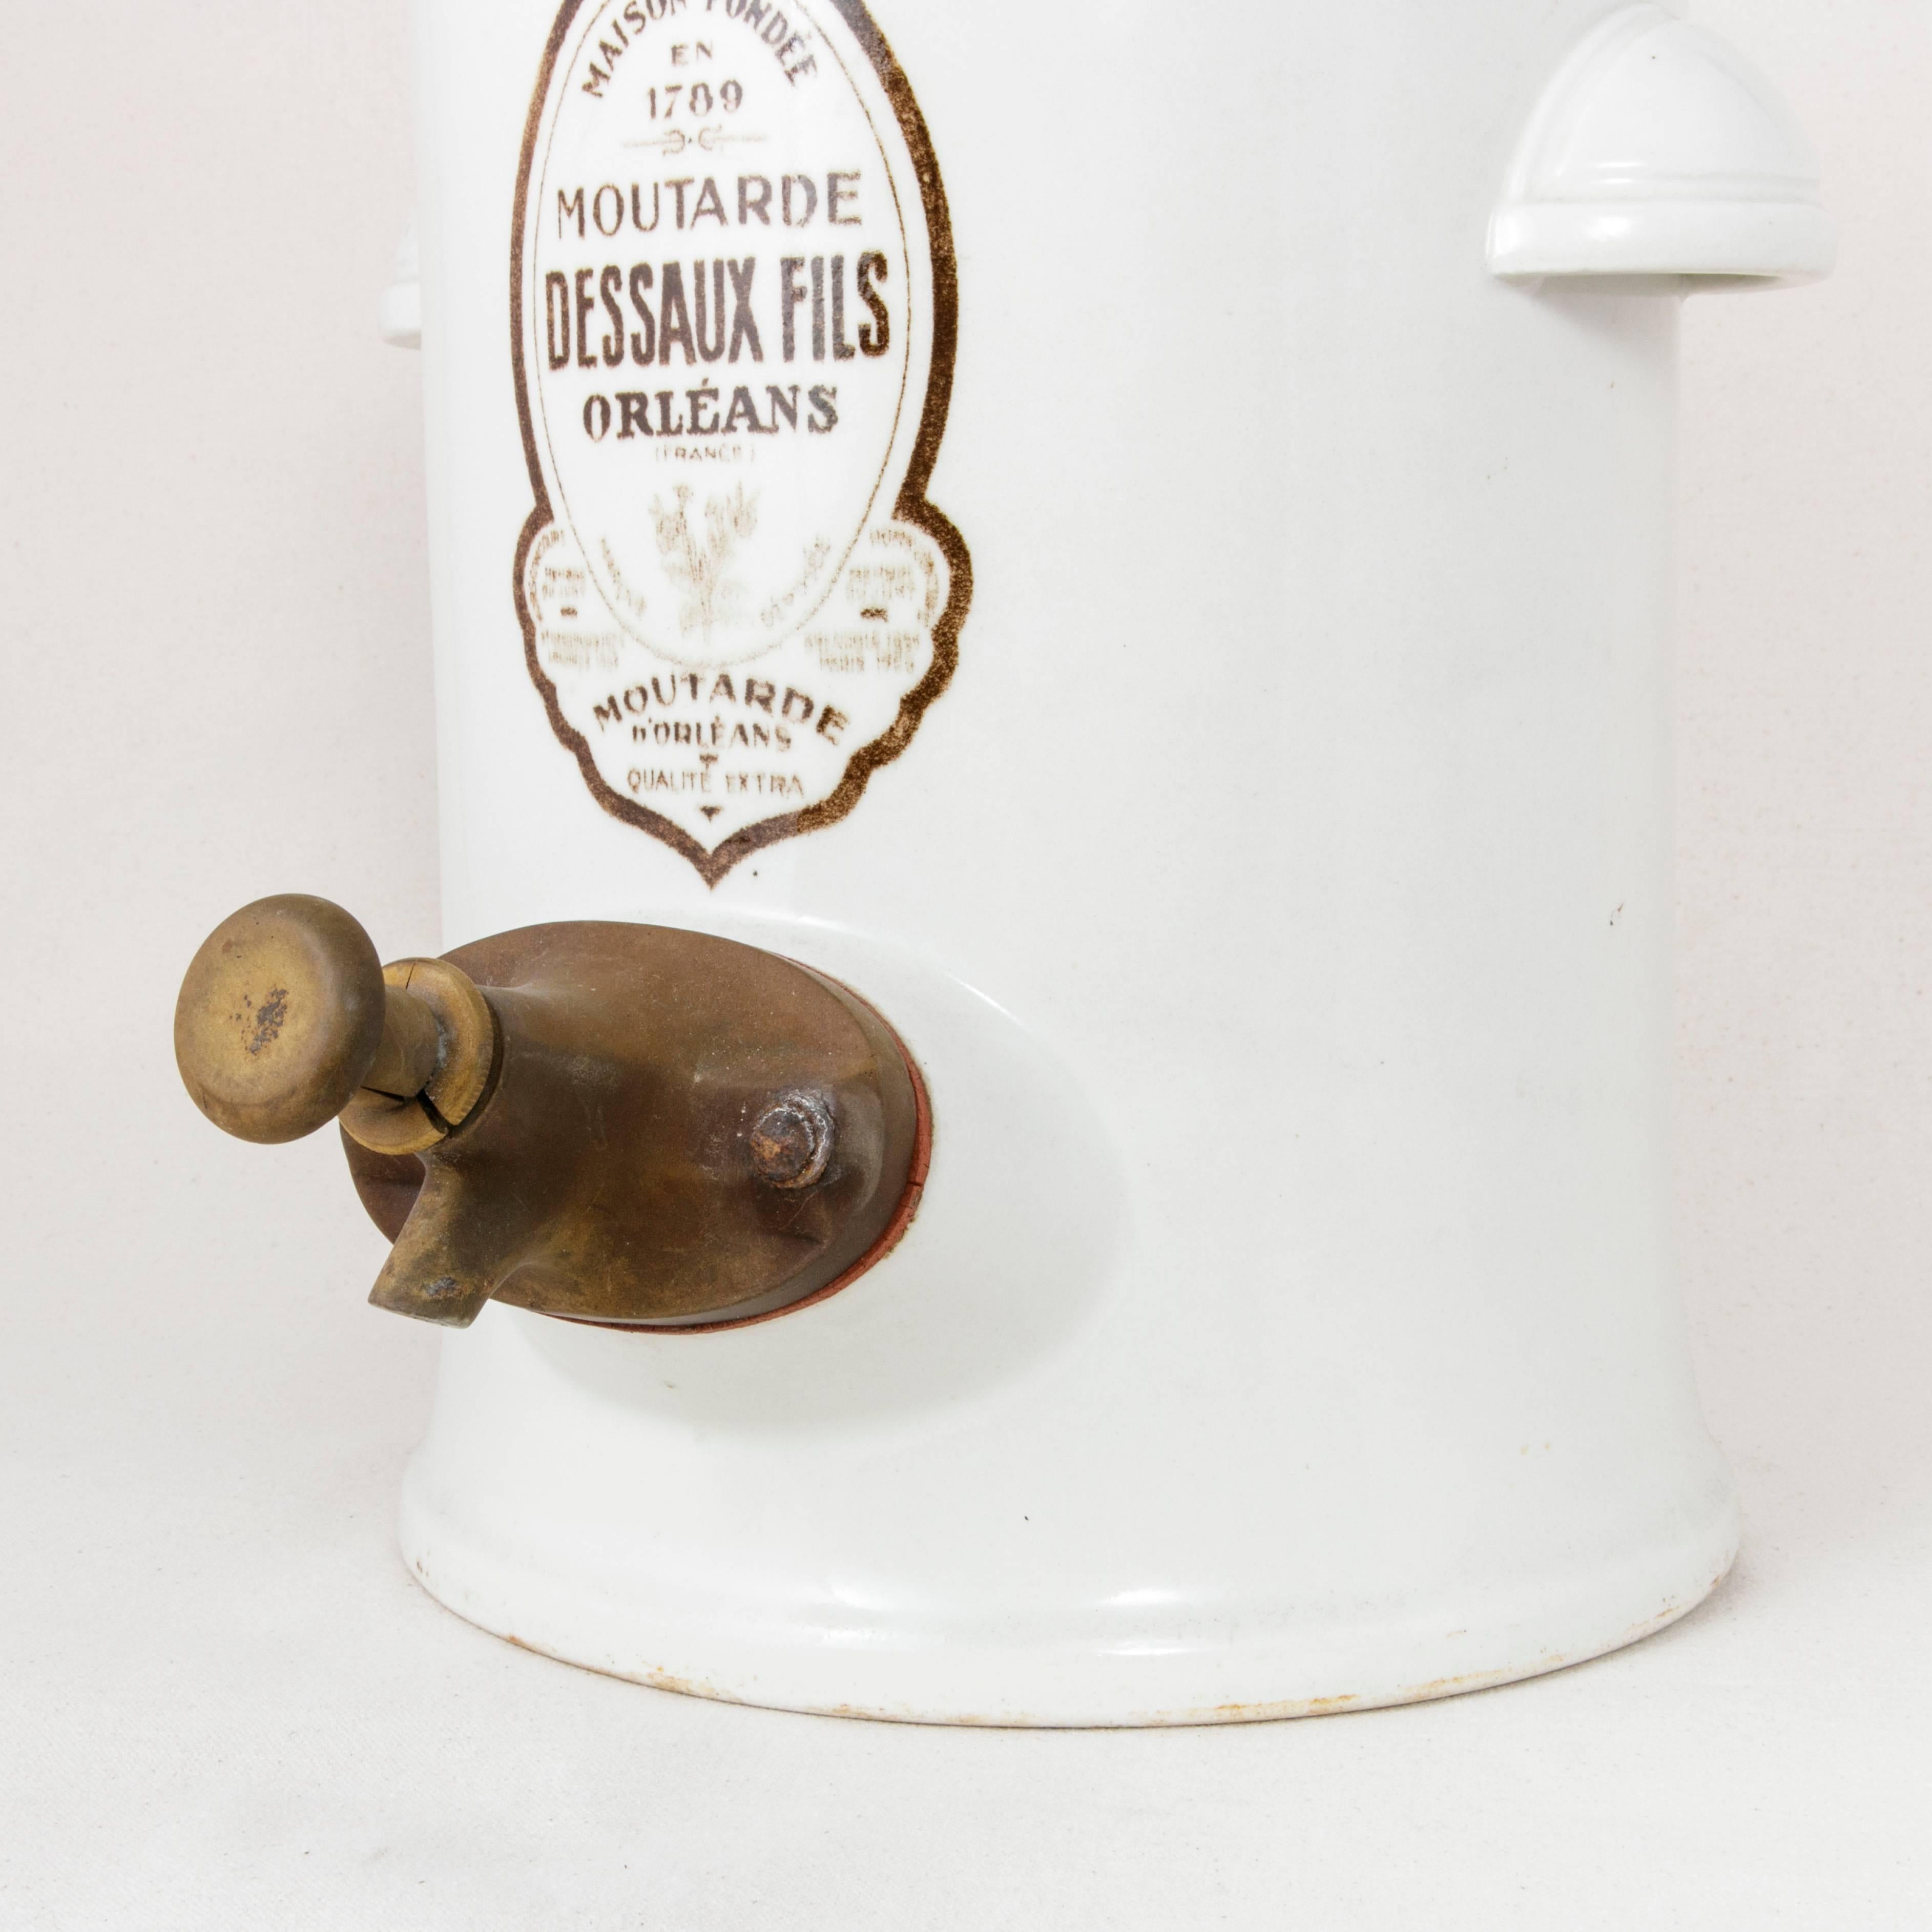 Large Early 20th Century Faience Mustard Pot or Dispenser Marked Dessaux Fils 2